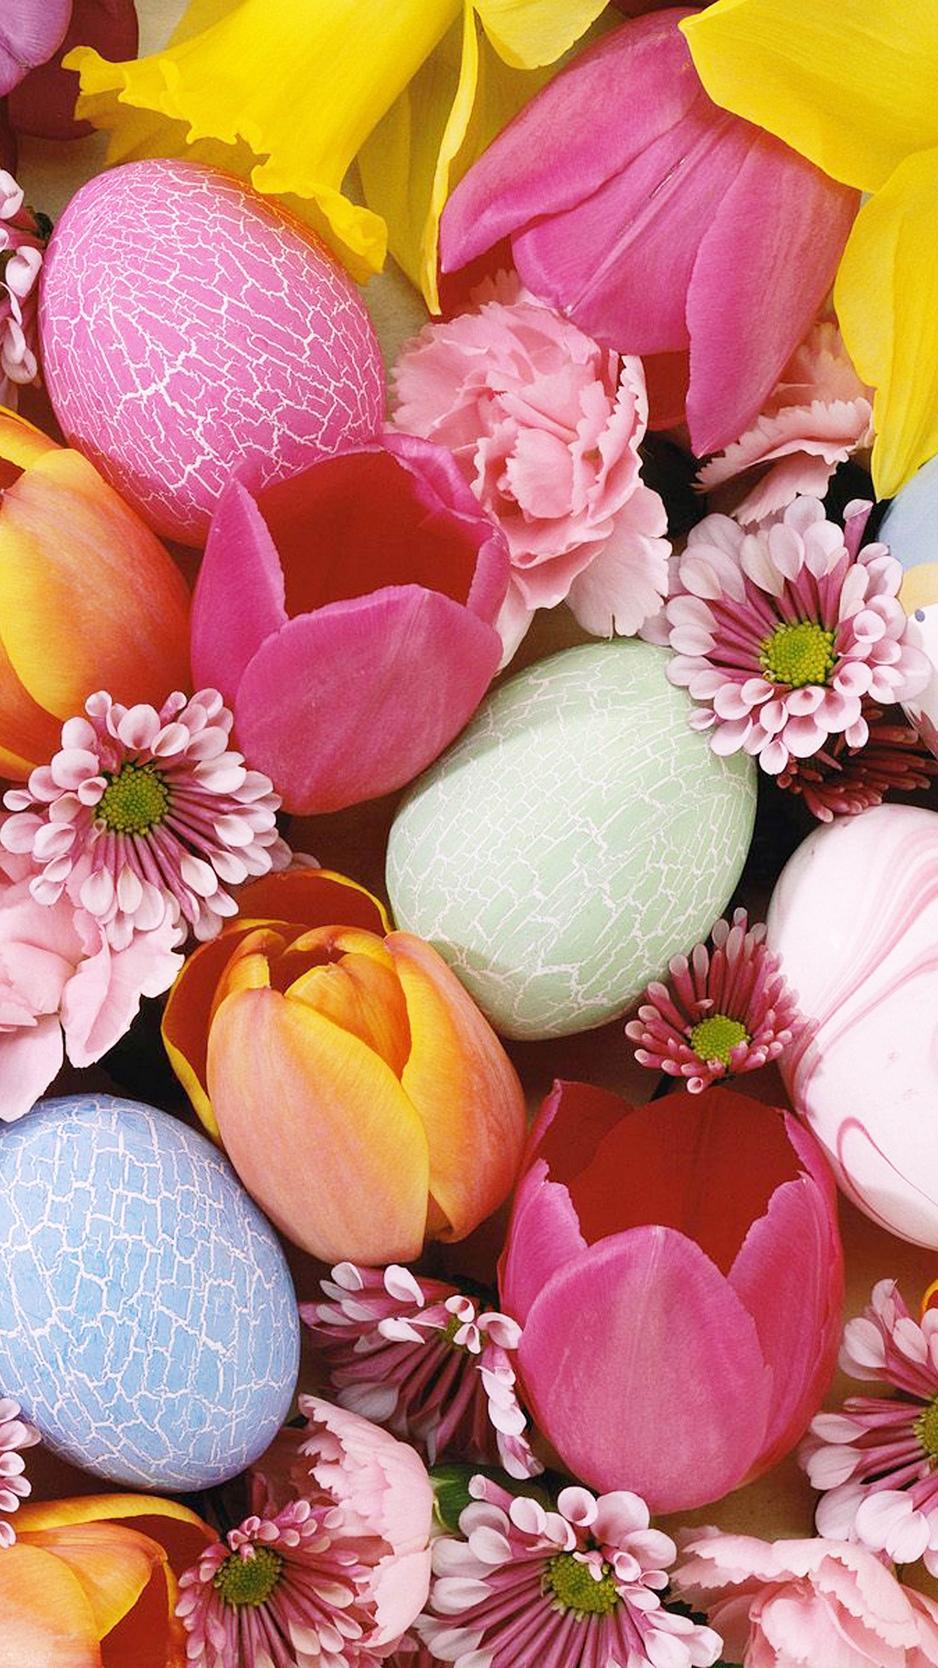 Download wallpaper 938x1668 tulips, eggs, easter background iphone